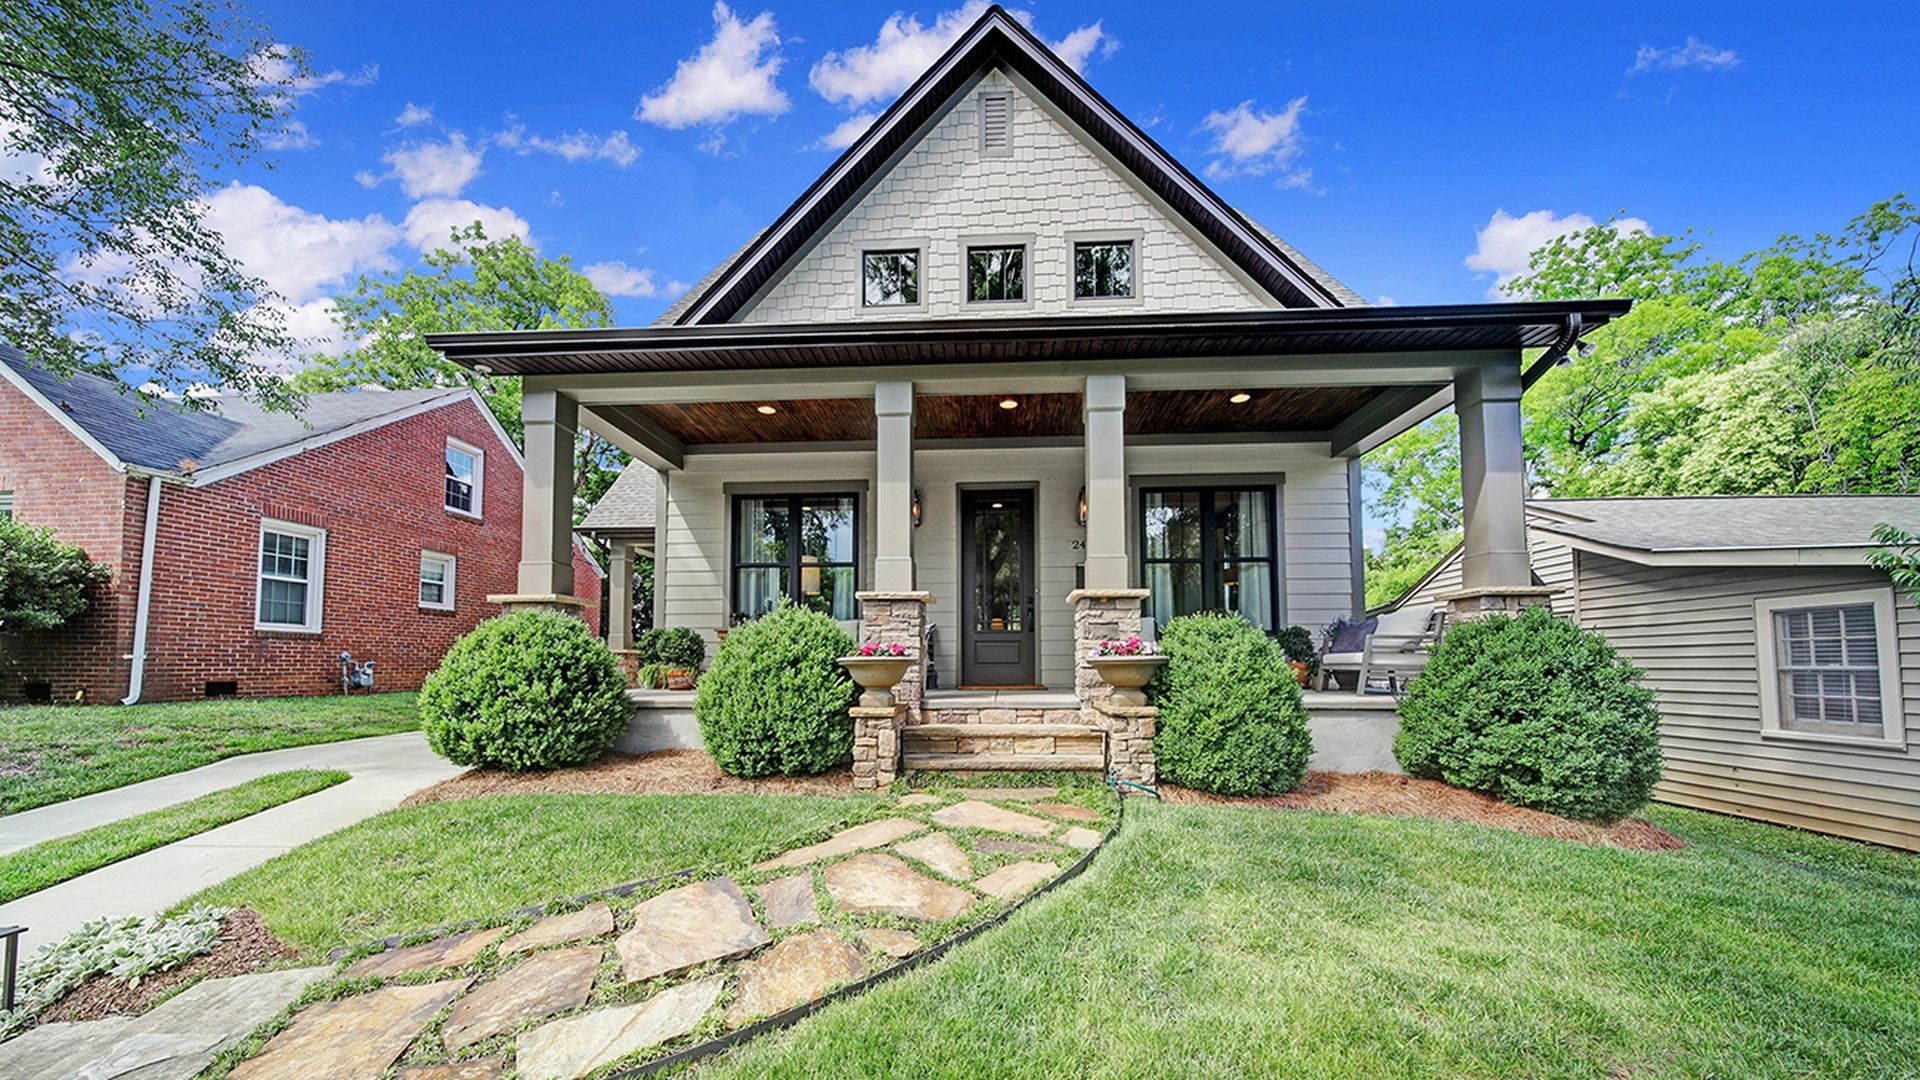 home with large front porch and four pillars out front with a curved stone walkway leading to it